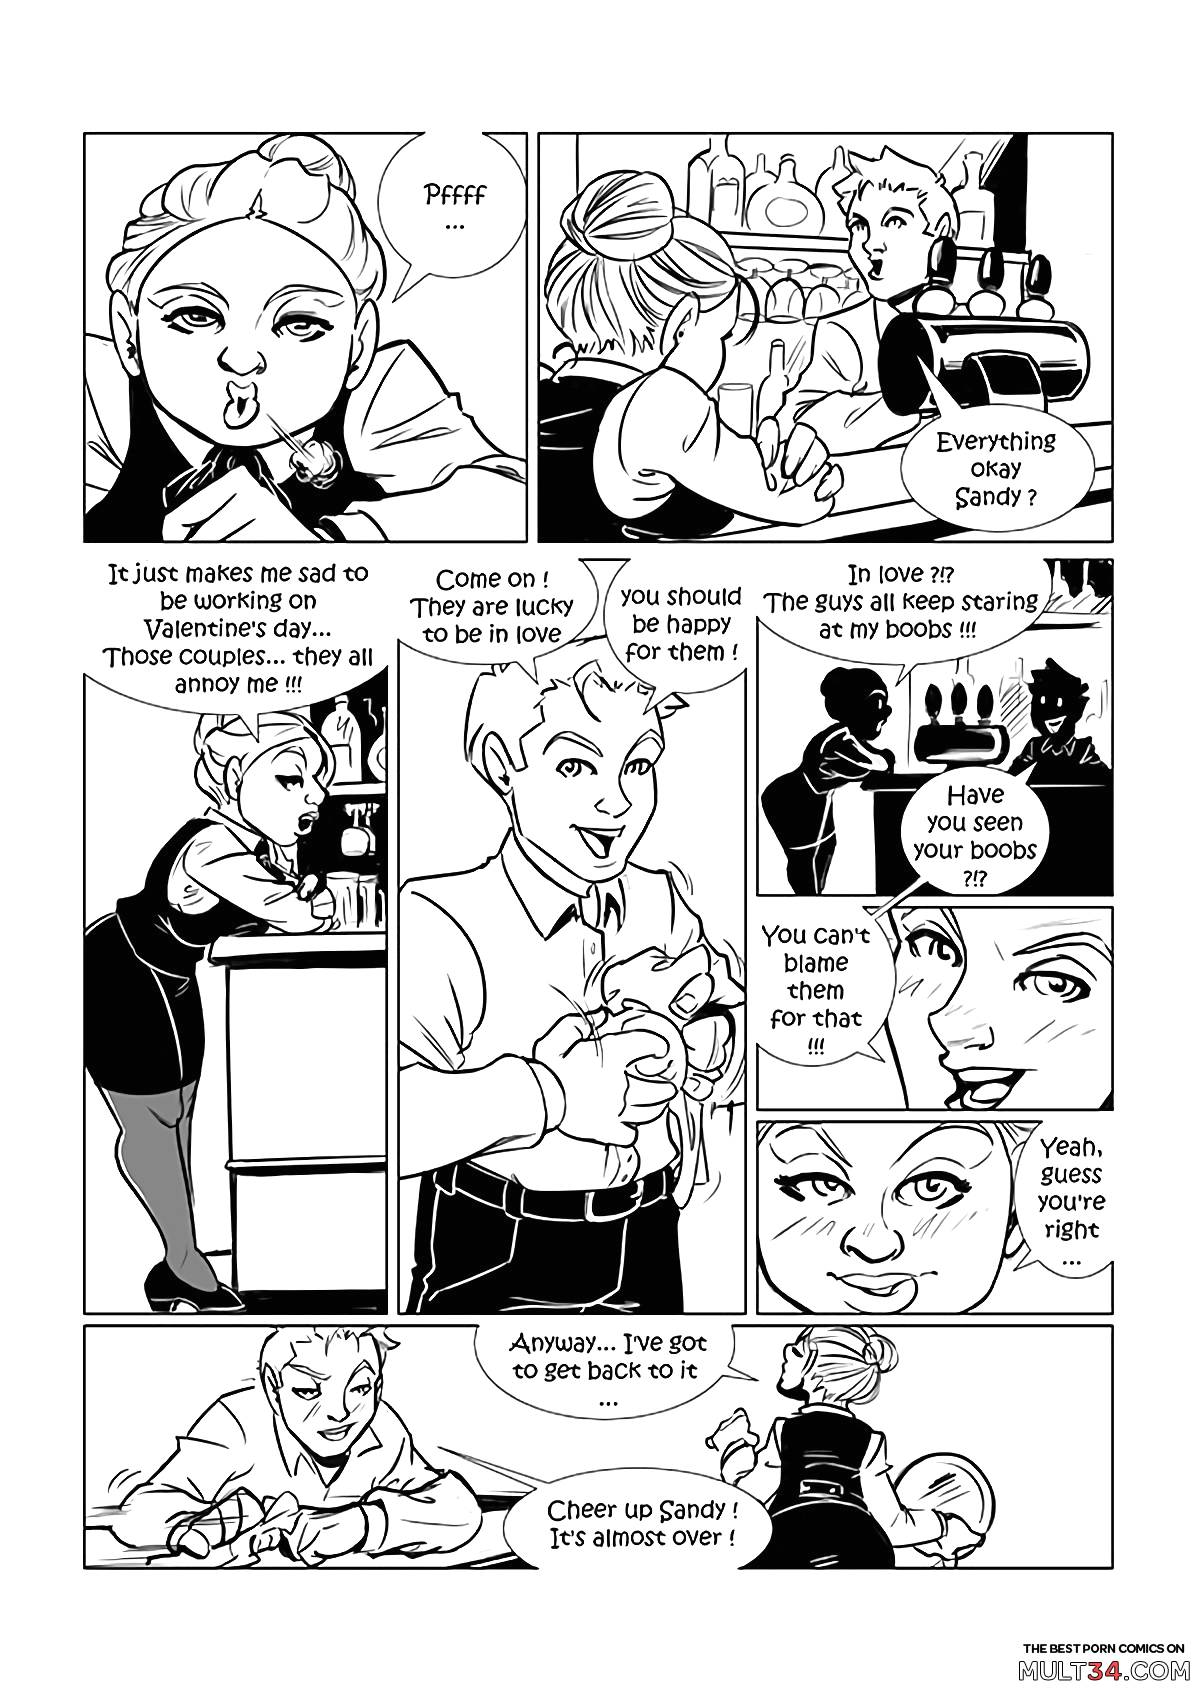 The Waitress - Valentine's day special page 3